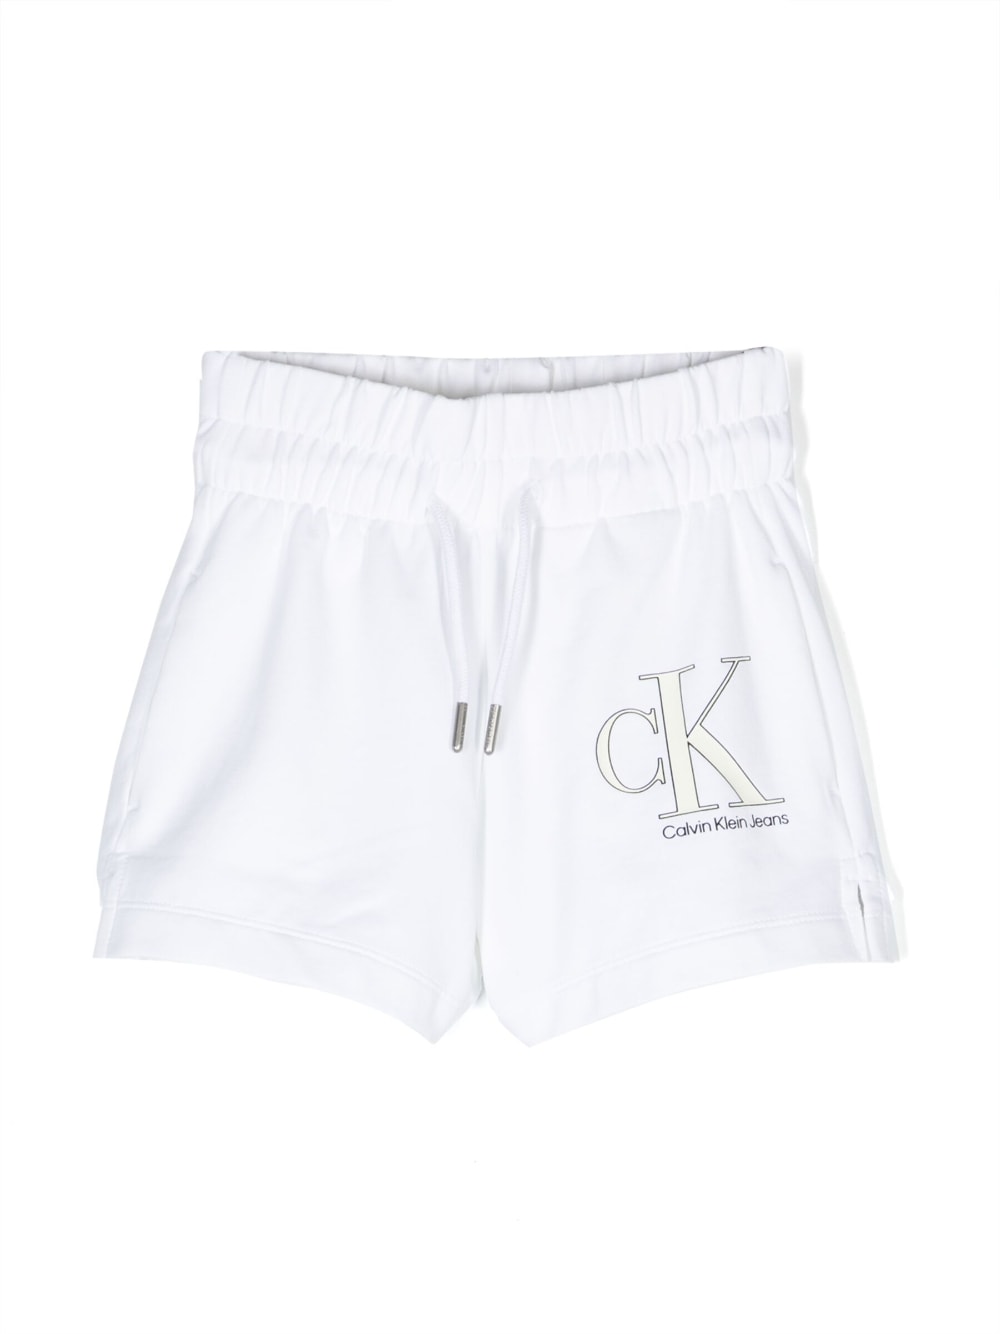 Shorts con coulisse - Rubino Kids